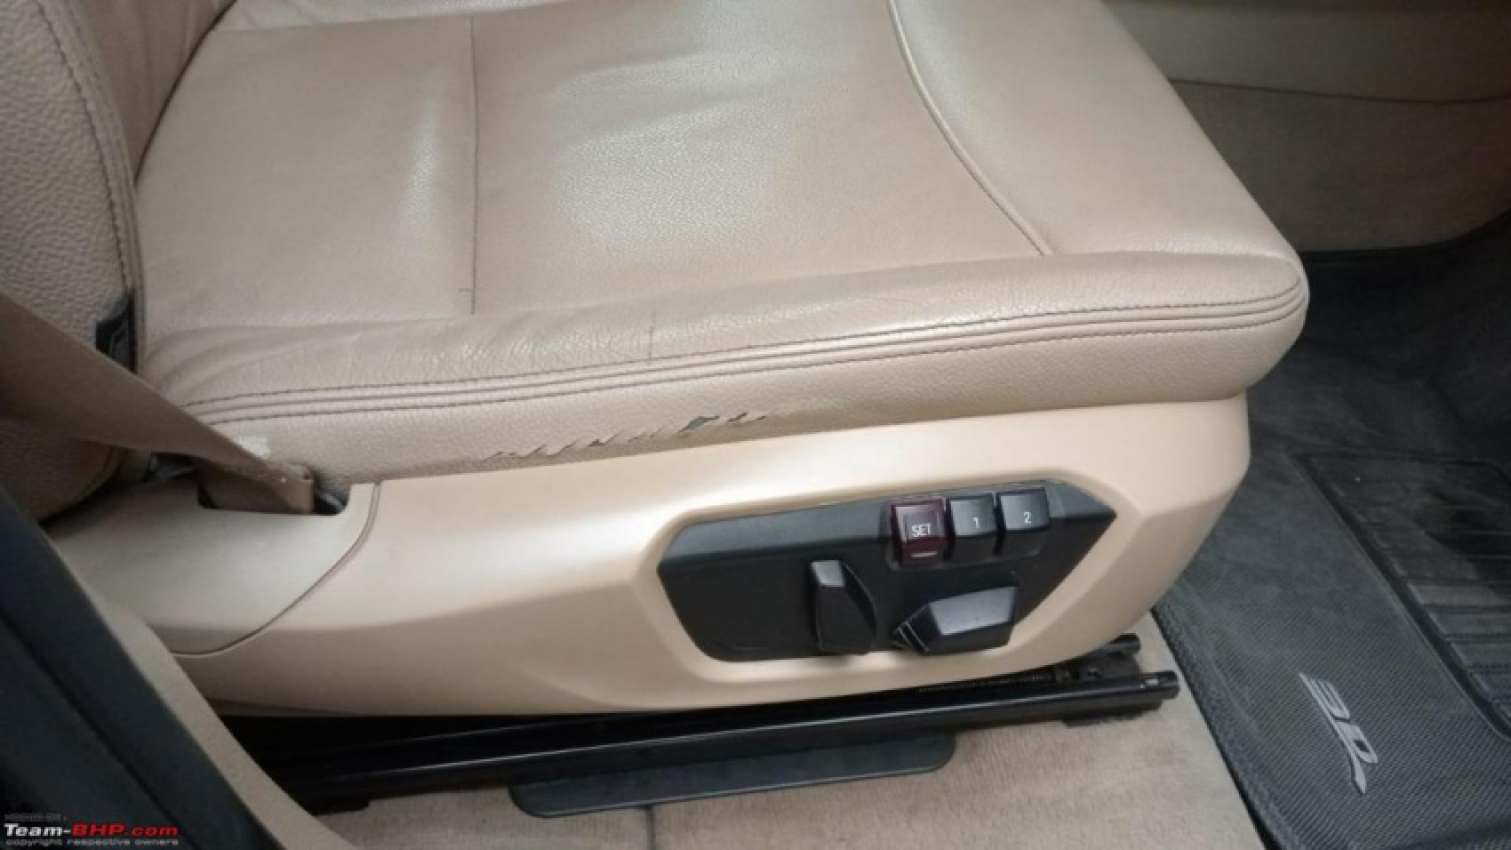 autos, bmw, cars, bmw x3, indian, interiors, member content, 2016 bmw x3 leather seat & door handle worn-out: need repair advice